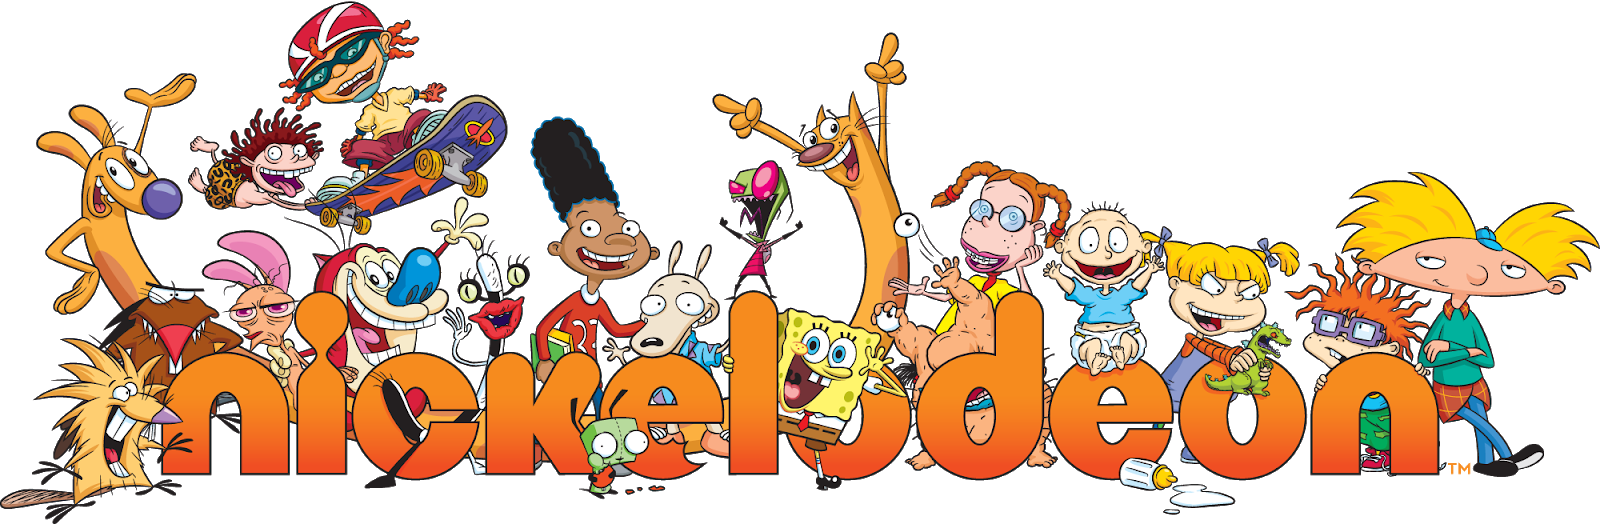 Nickalive How Nickelodeon Taps Millennial Nostalgia To Bring Back The 90s